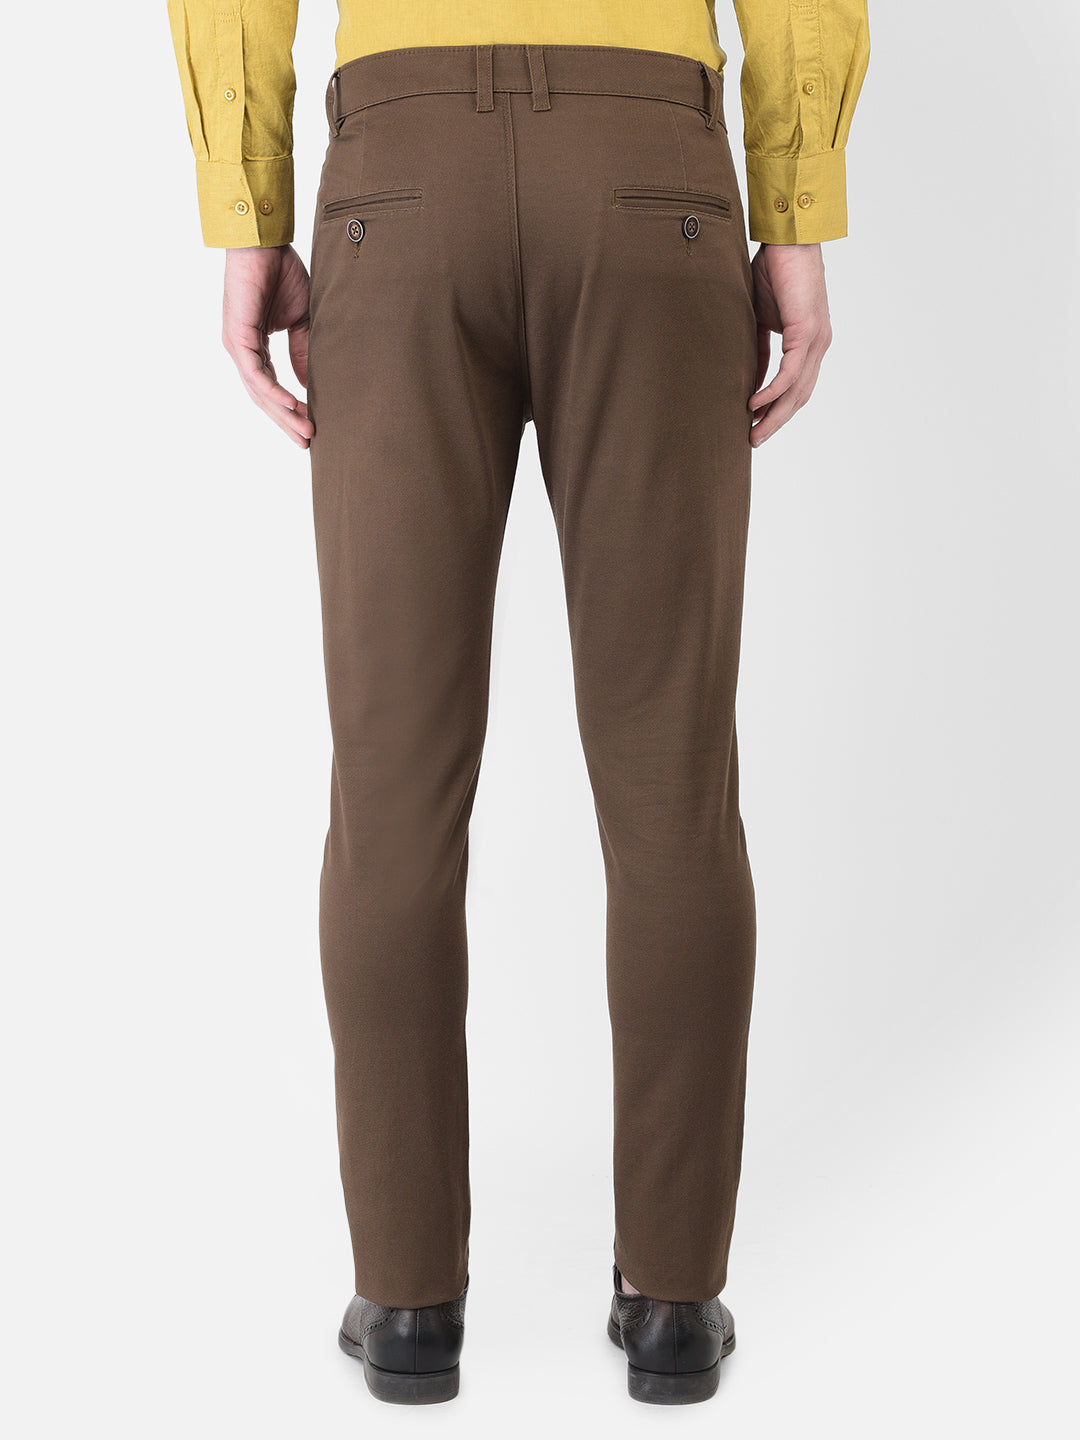 Brown Trousers - Men Trousers